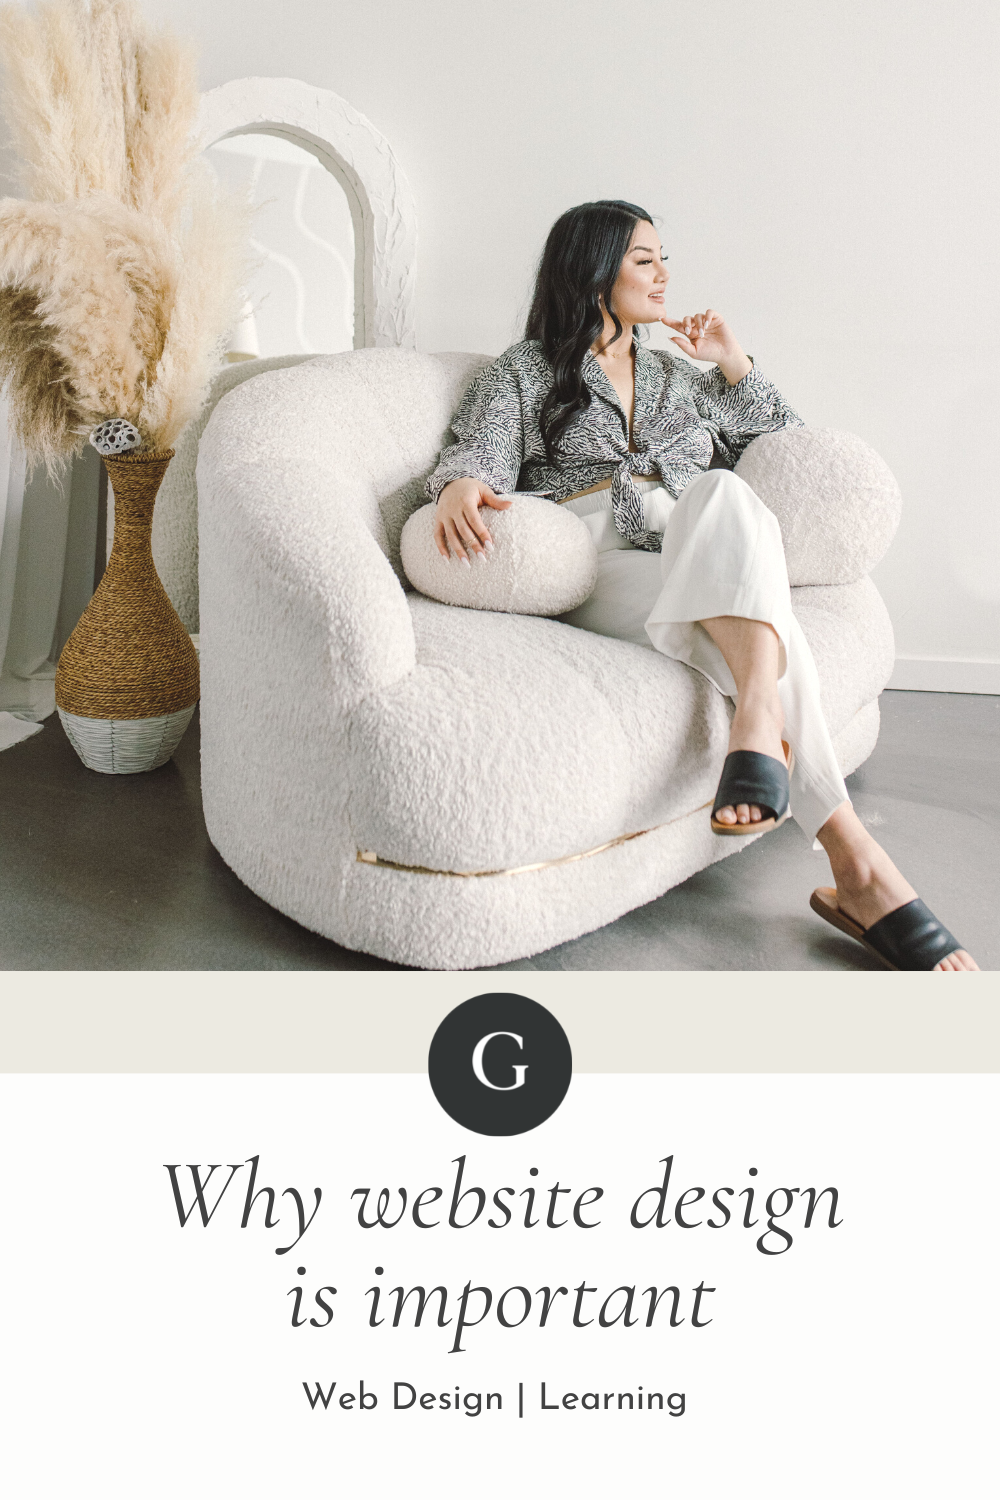 Why website design is important for any business